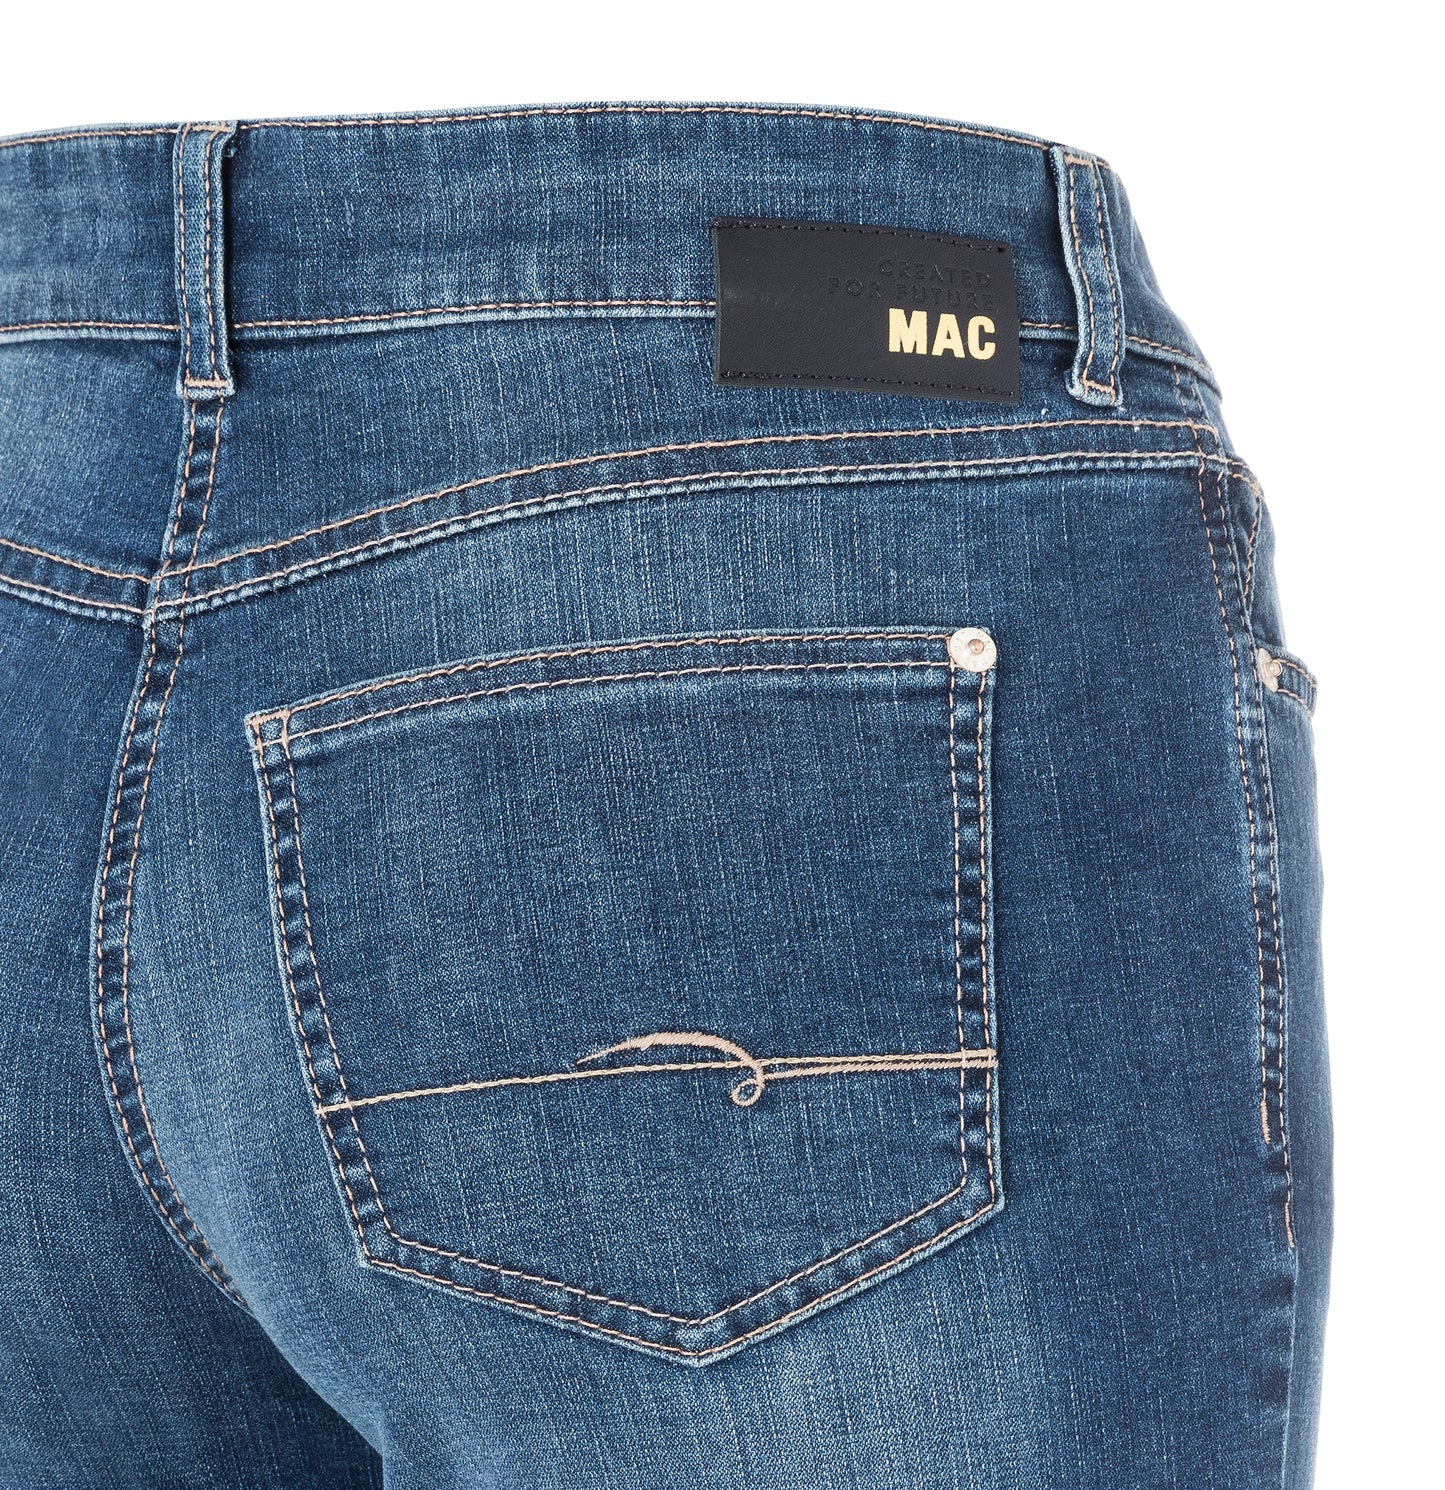 MAC JEANS - ANGELA, PERFECT Fit Forever Denim